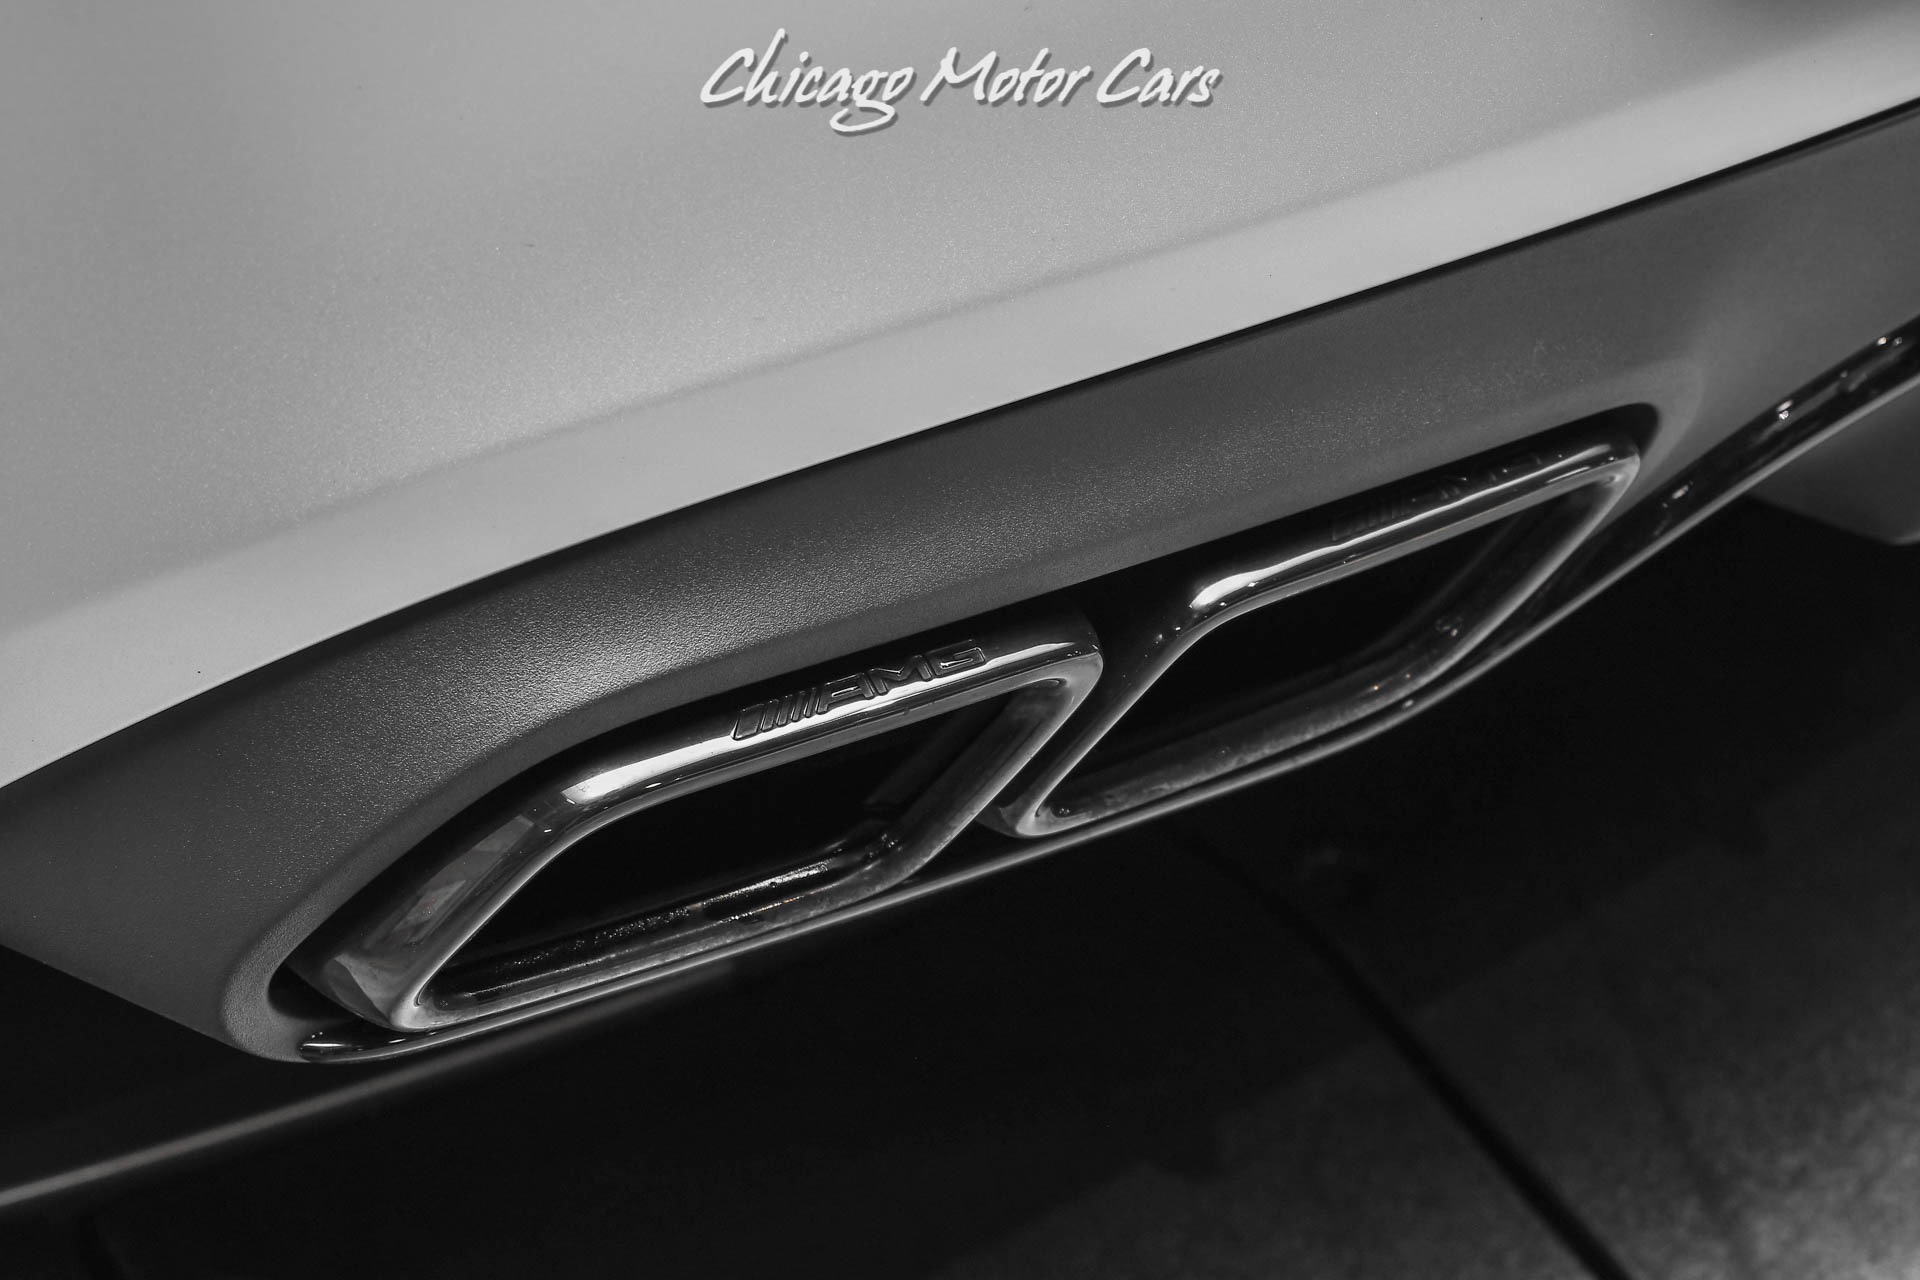 Used-2018-Mercedes-Benz-C-Class-C63-S-AMG-Coupe-ONE-OWNER-12K-MILES-AMG-PERFORMANCE-SEATS